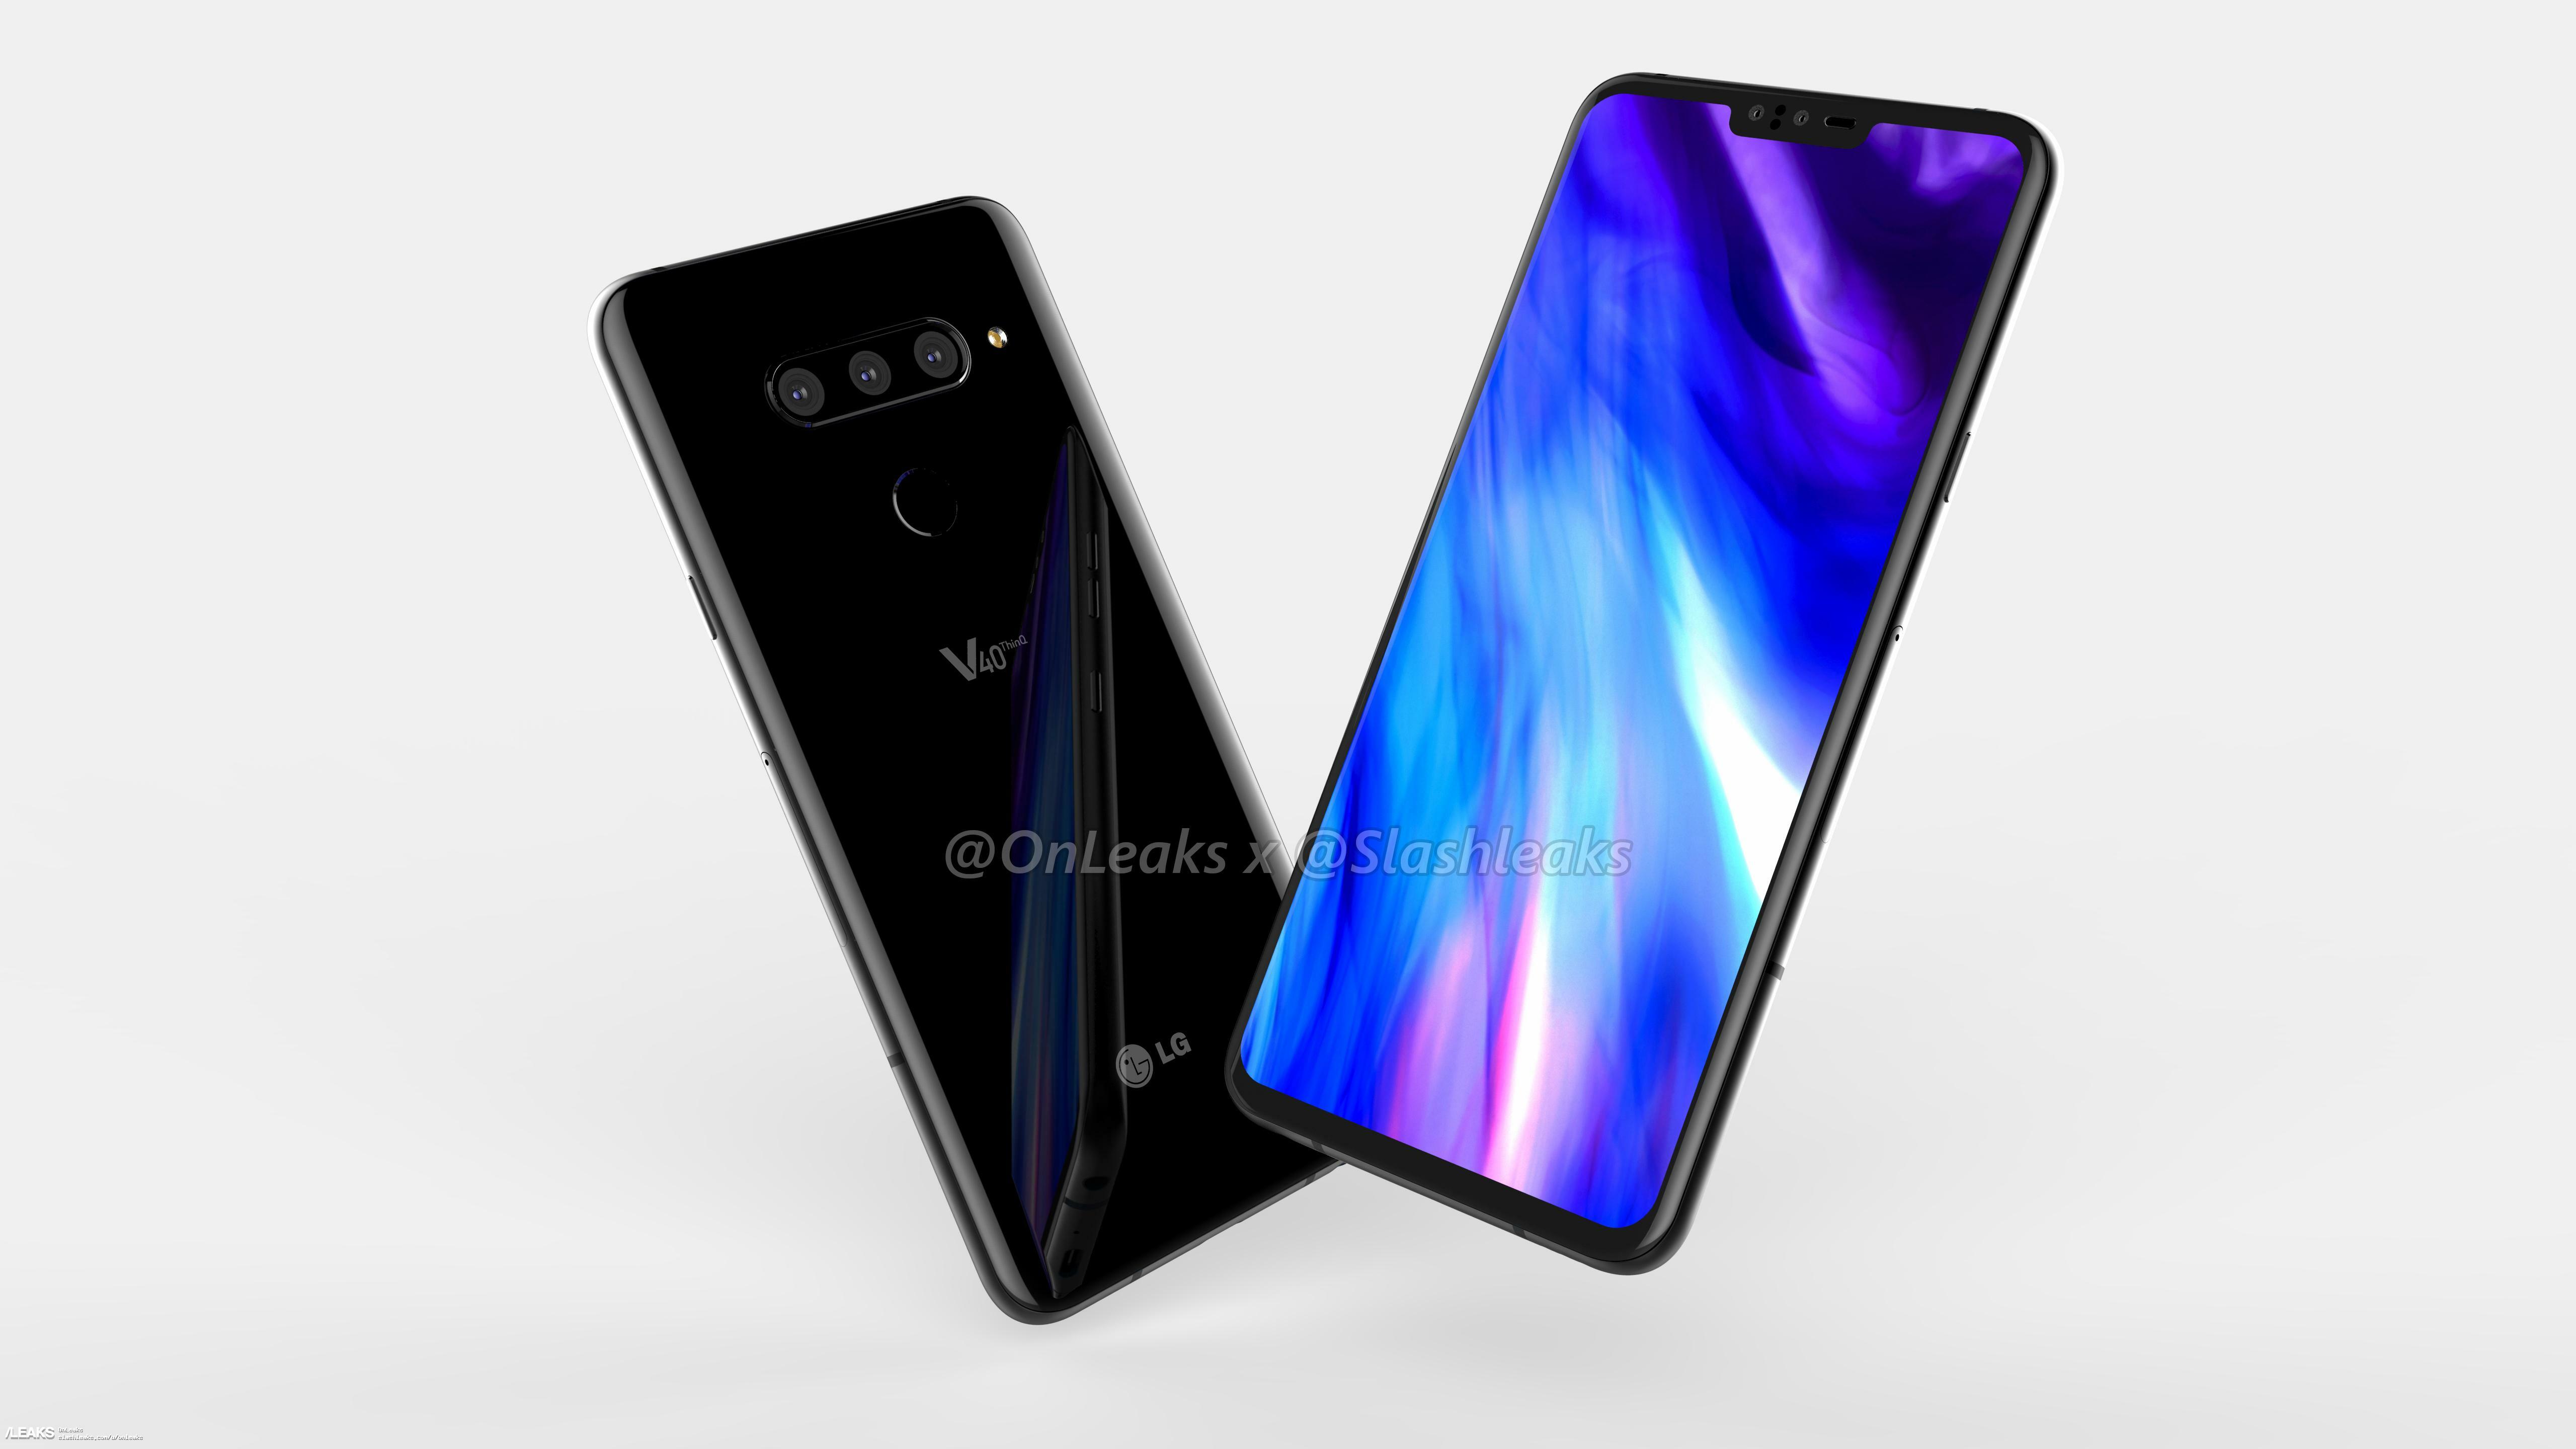 Is there anything else I should know about the LG V40 ThinQ?